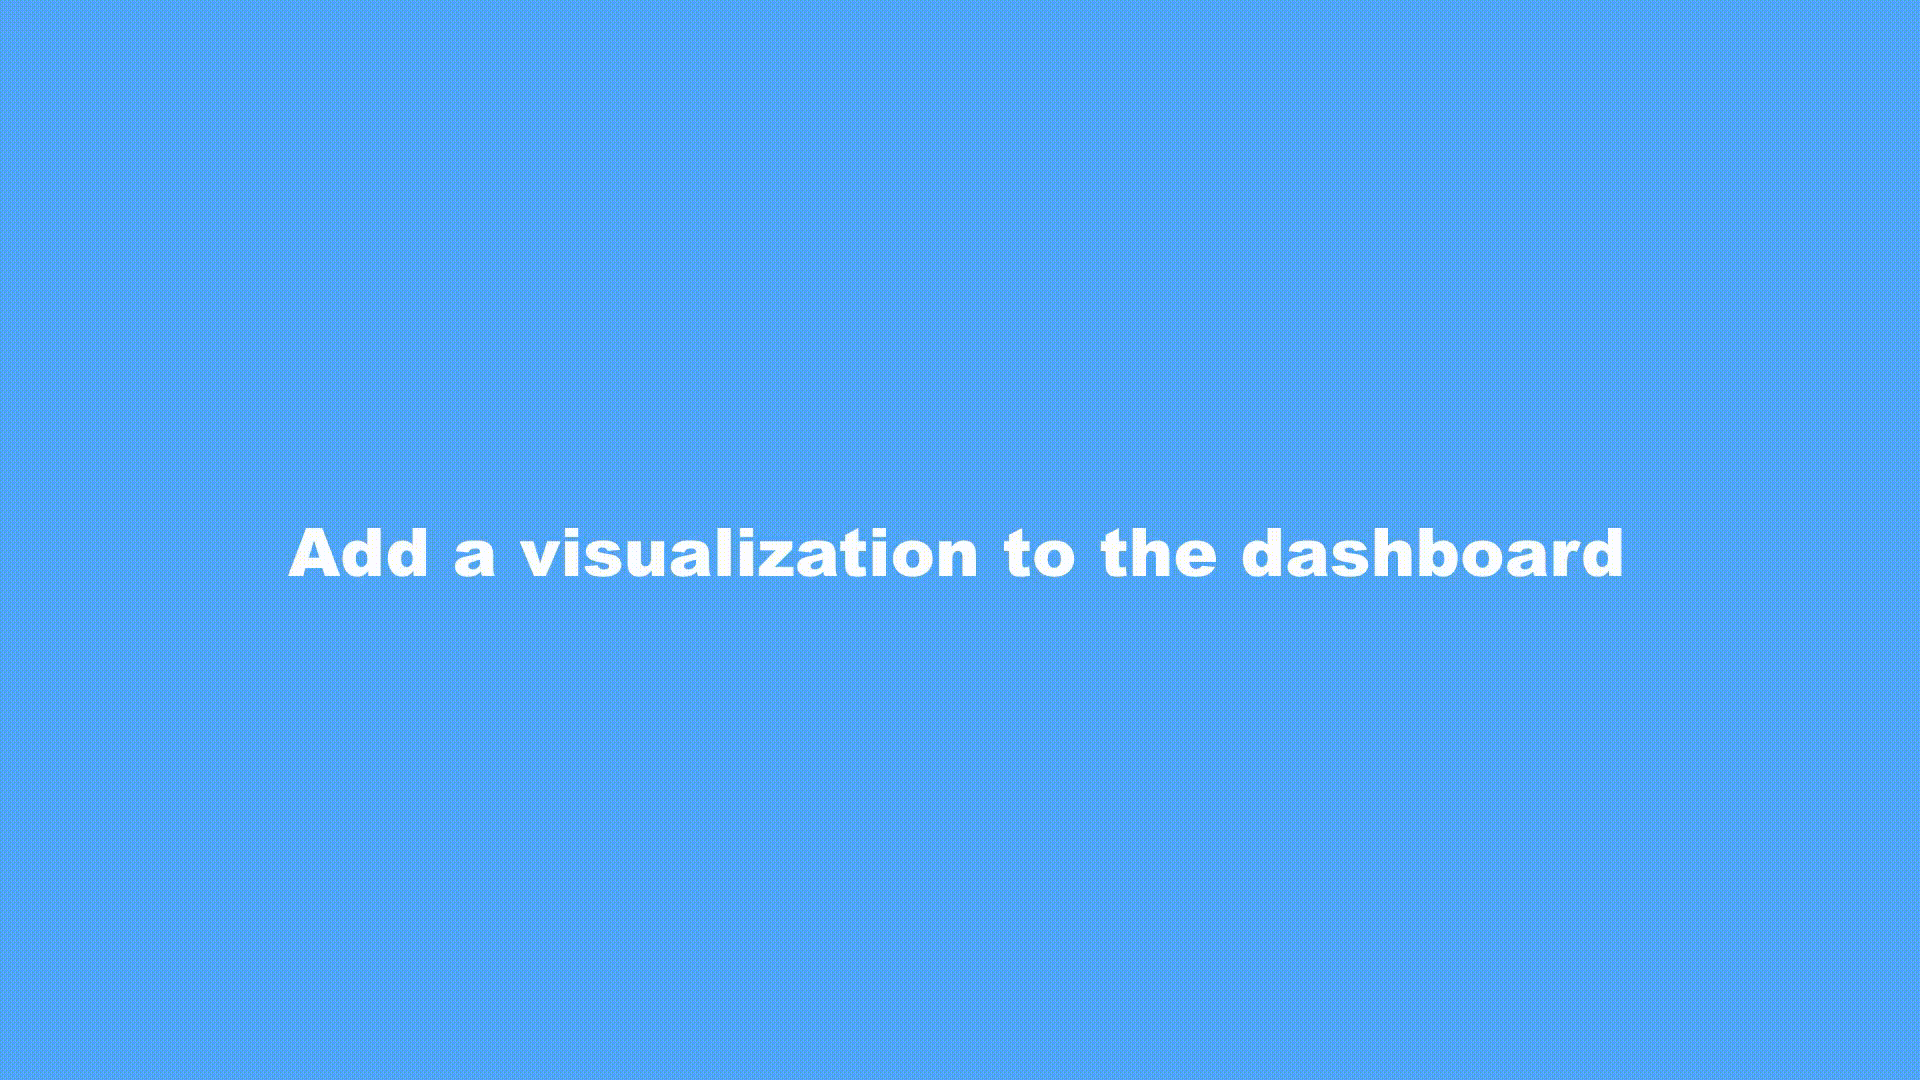 "animation showing the steps to add a visualization to the dashboard